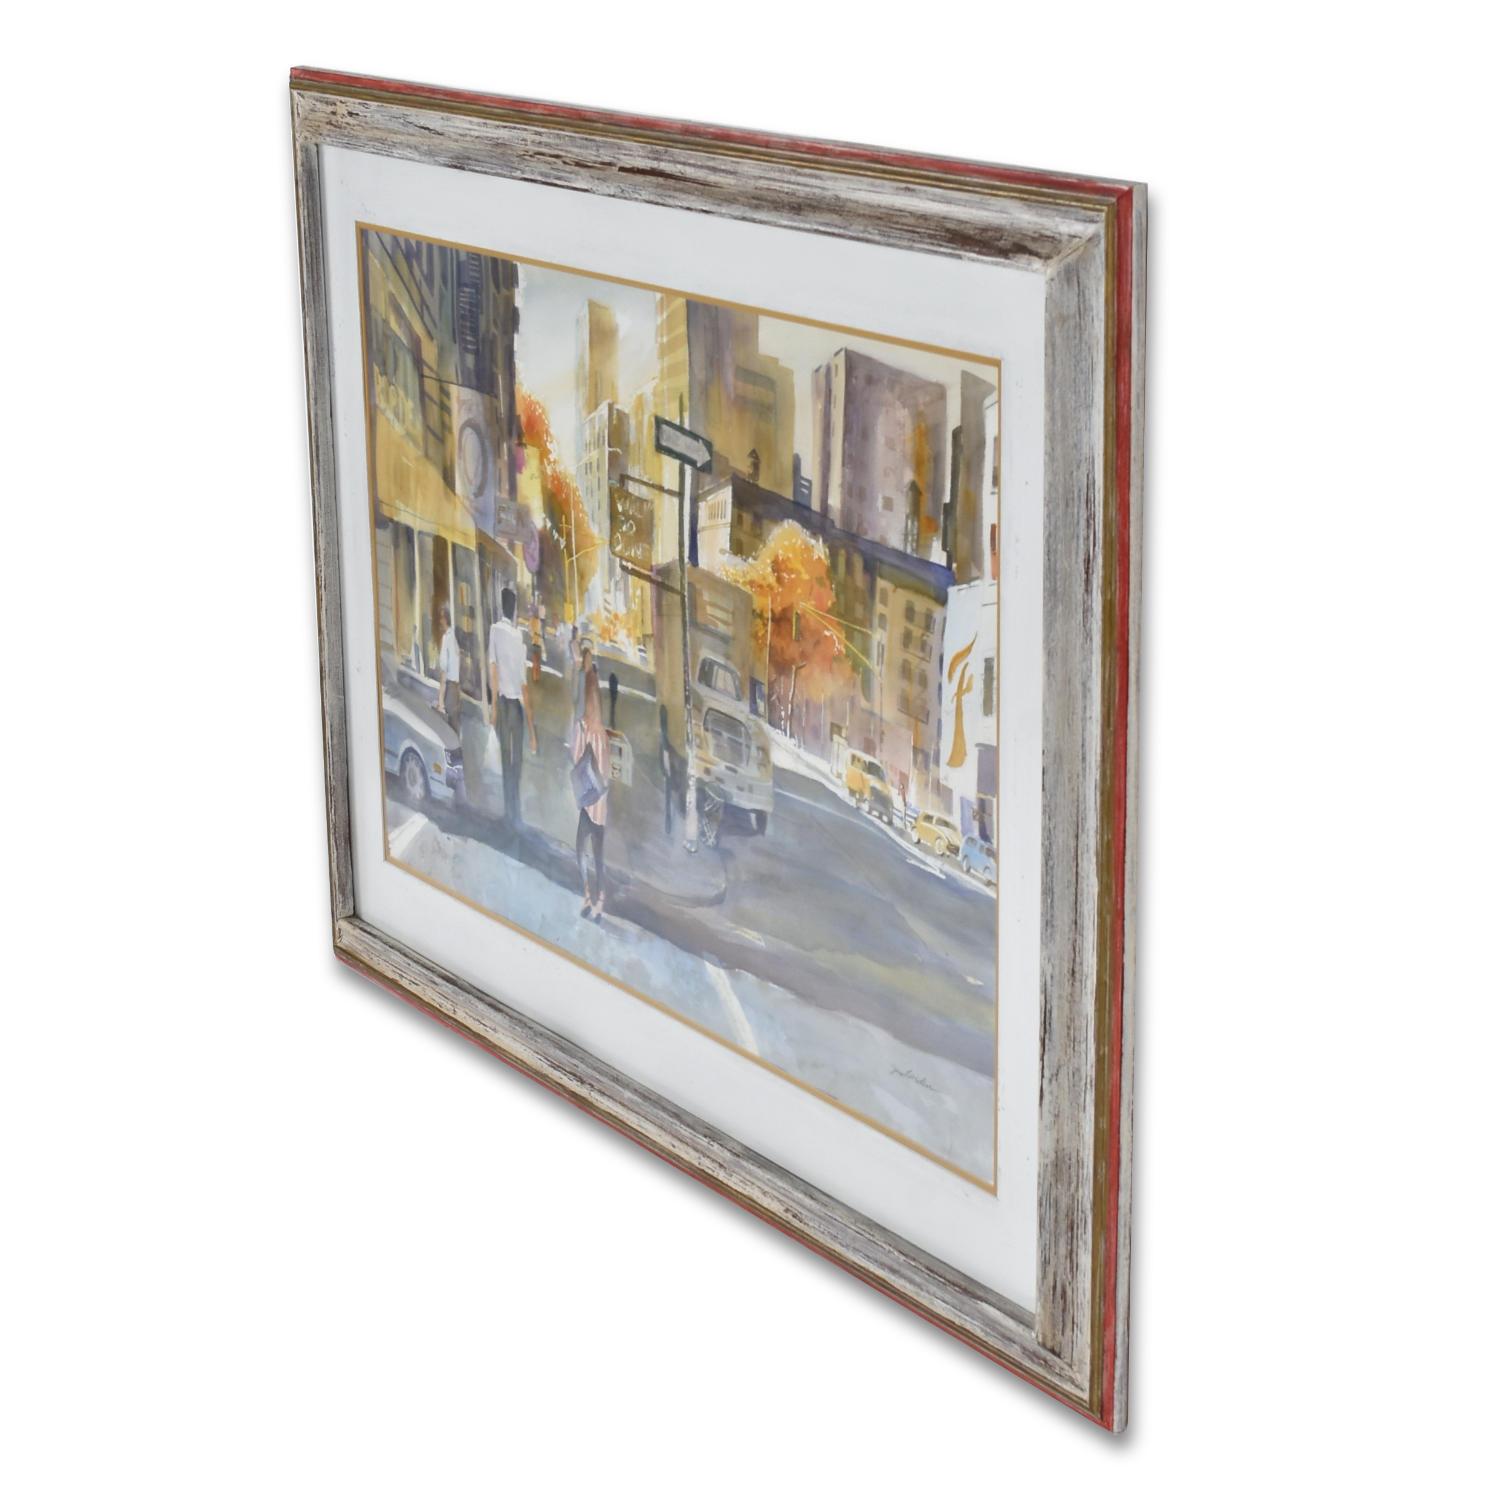 Absolutely masterful watercolor street scene painting by James C. Borden (1928-2013). Prepare to be awestruck when you lay eyes on this exquisitely detailed watercolor painting by James Borden. The modern painting depicts an ethereal urban scene